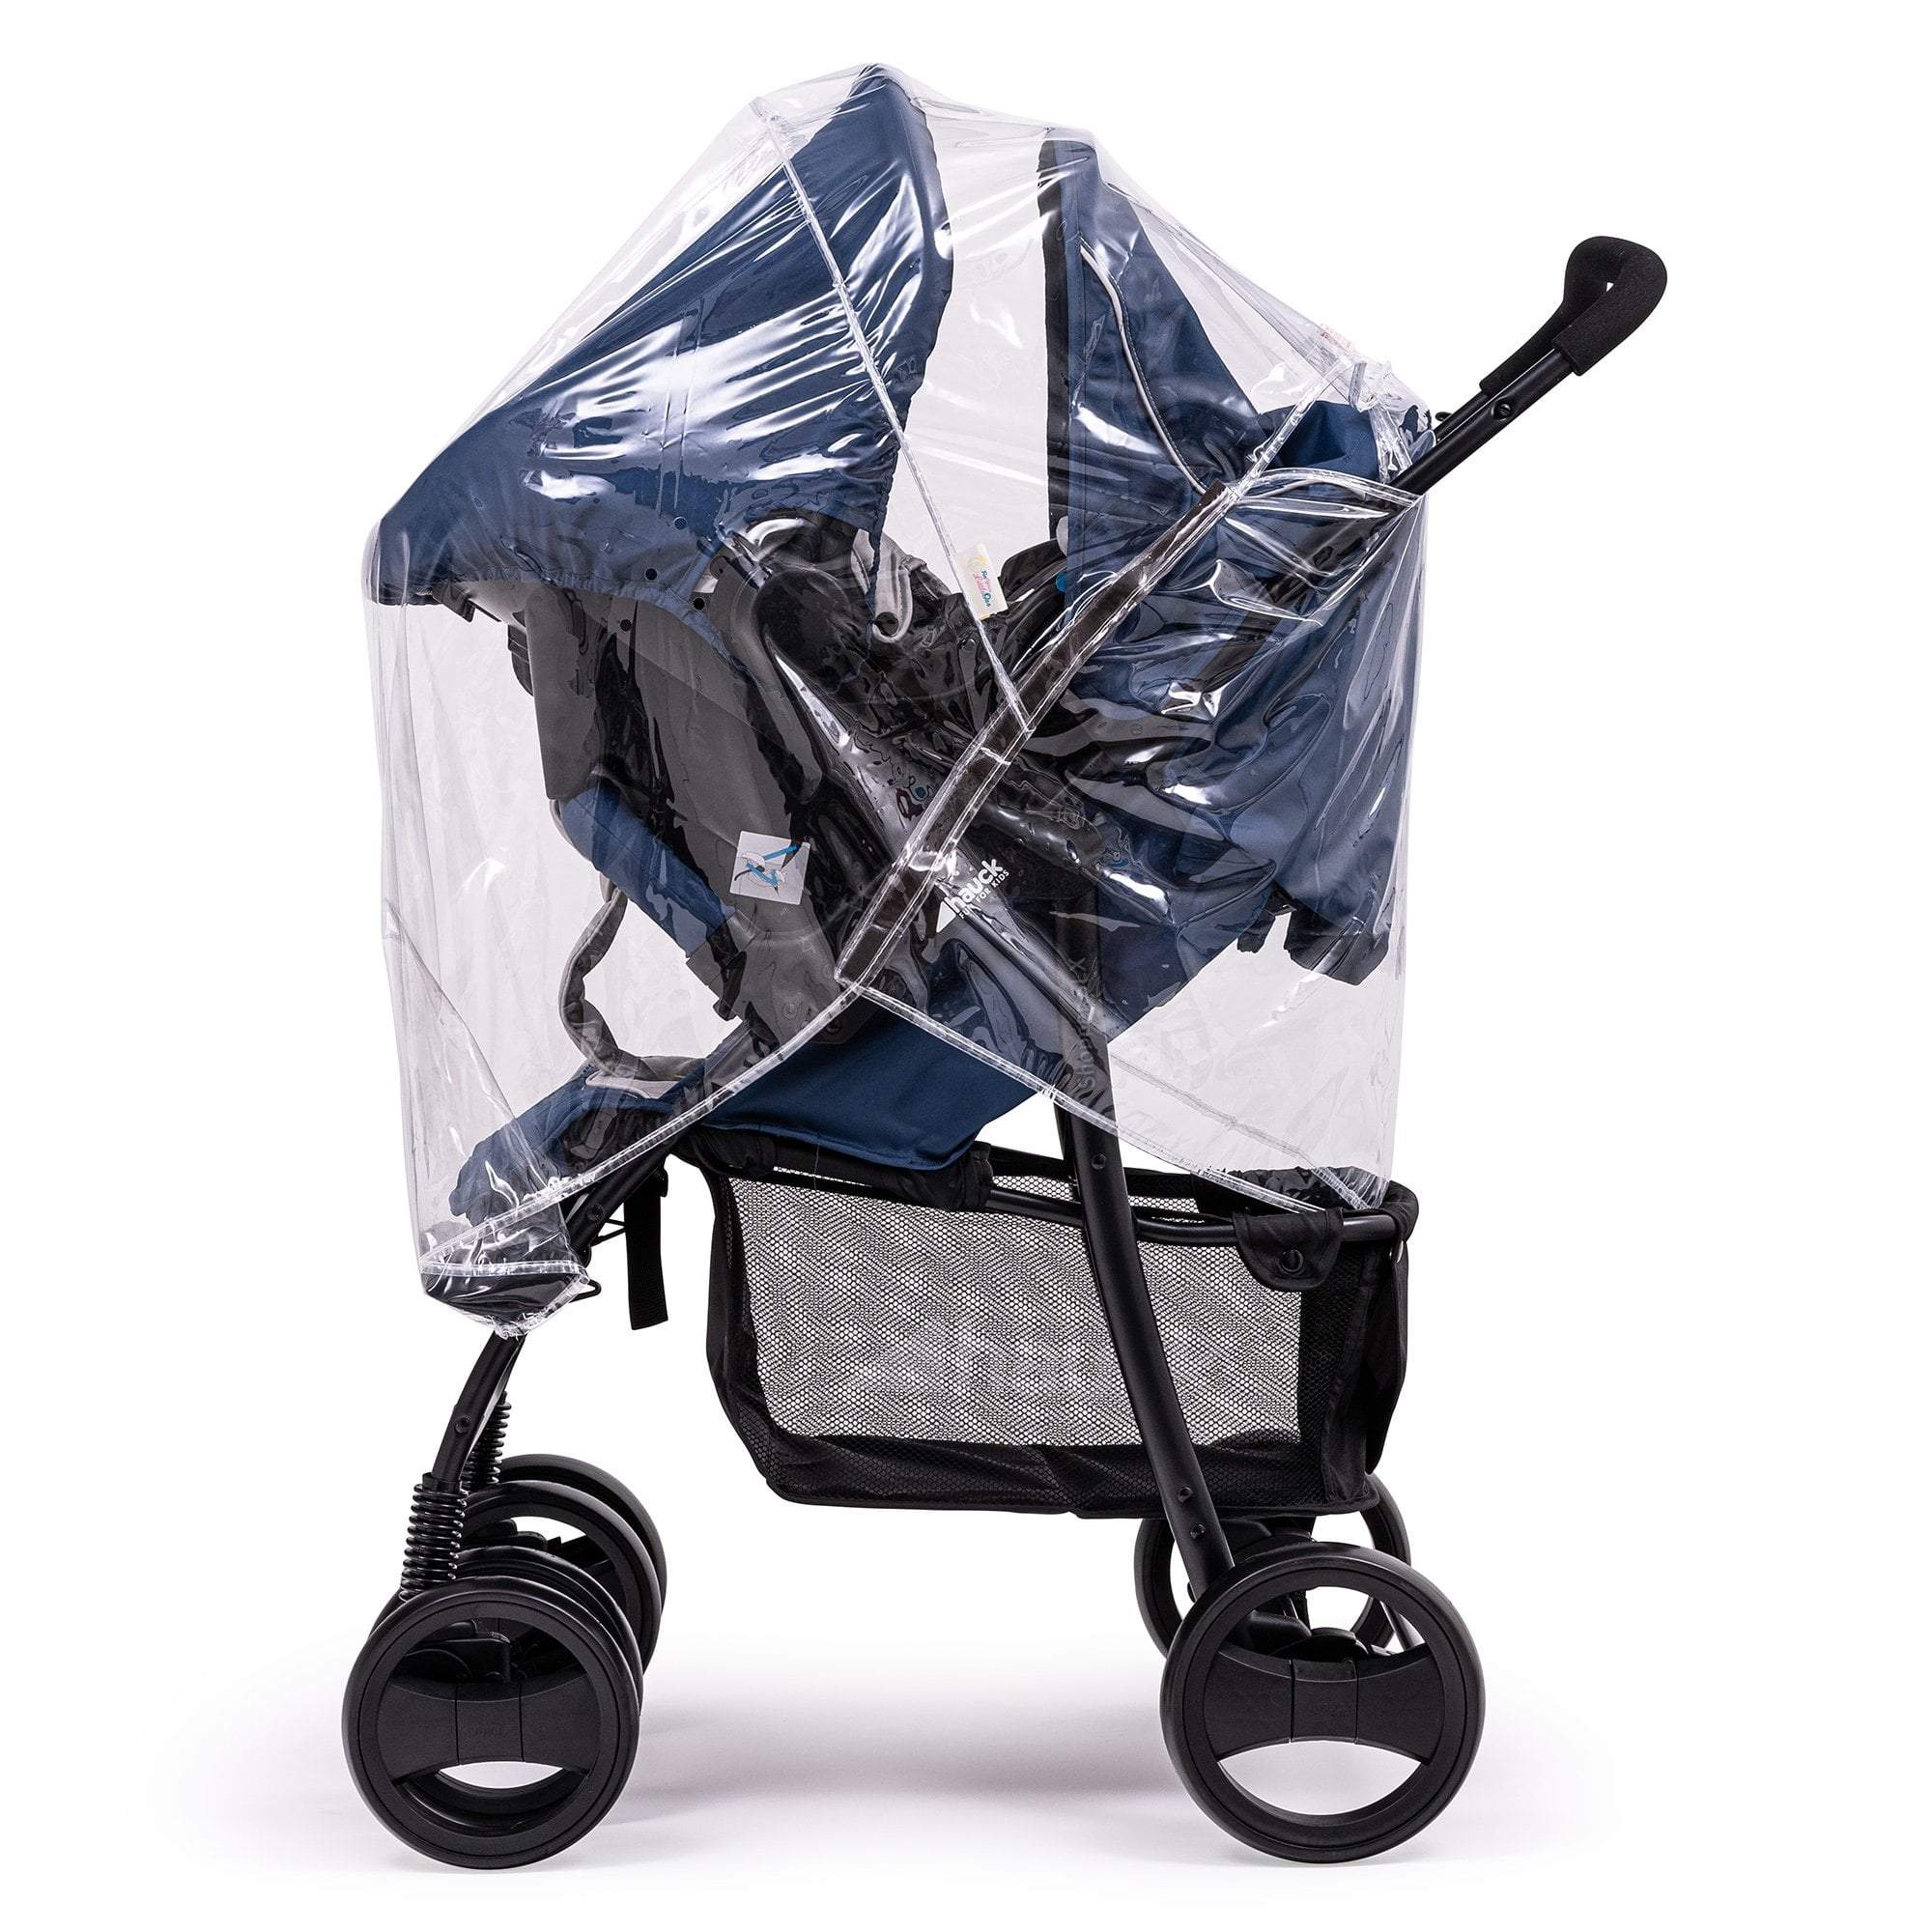 Travel System Raincover Compatible with Excel - Fits All Models - For Your Little One